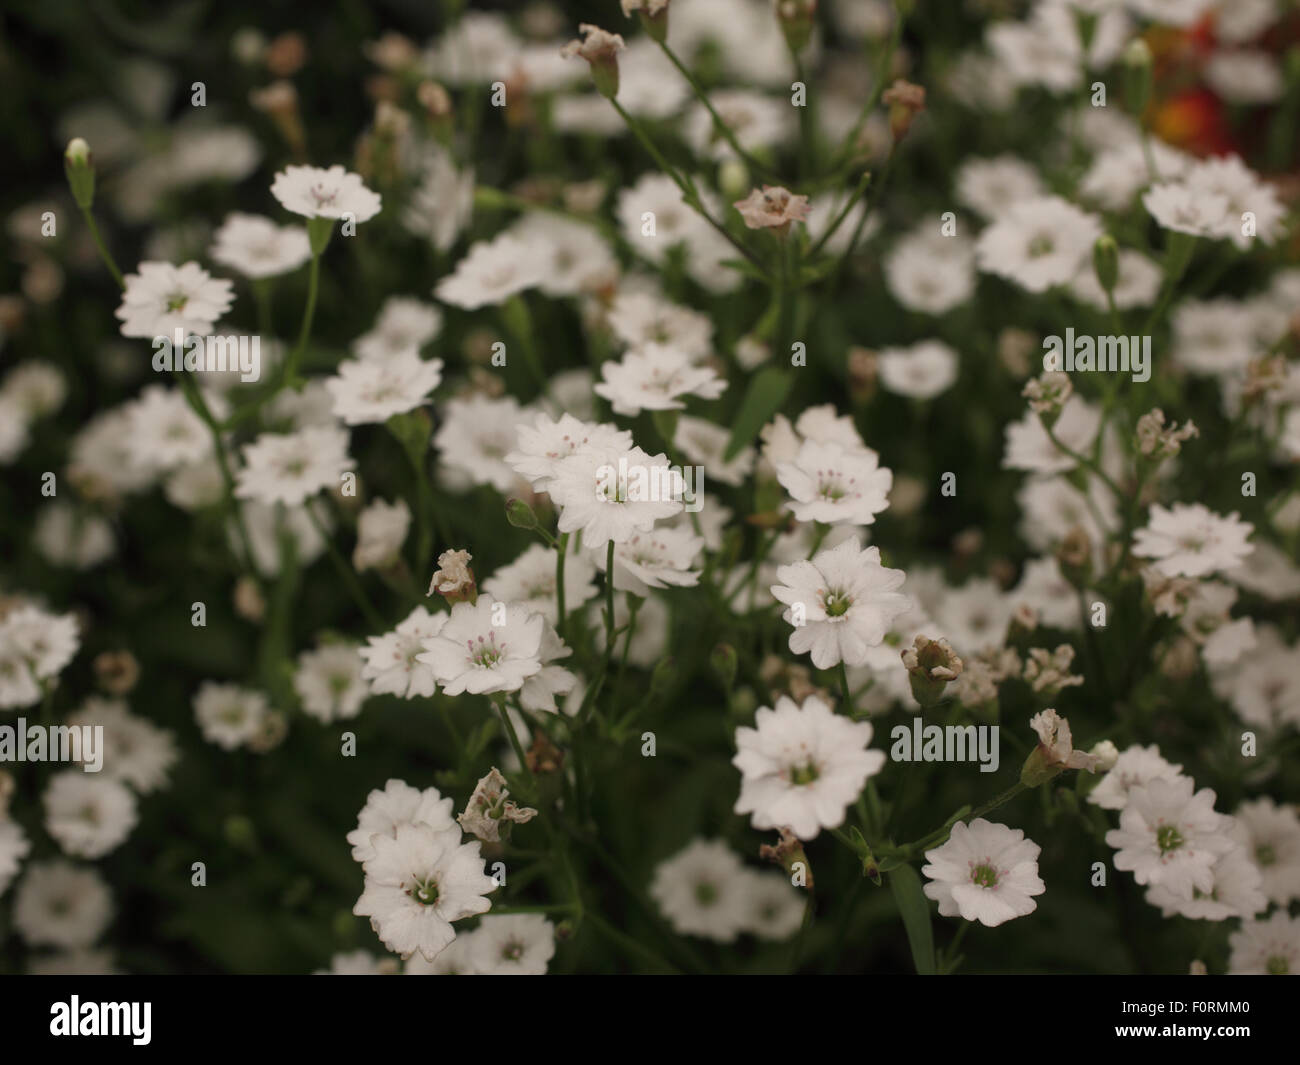 Silene 'Starry Dreams' close up of flowers Stock Photo - Alamy